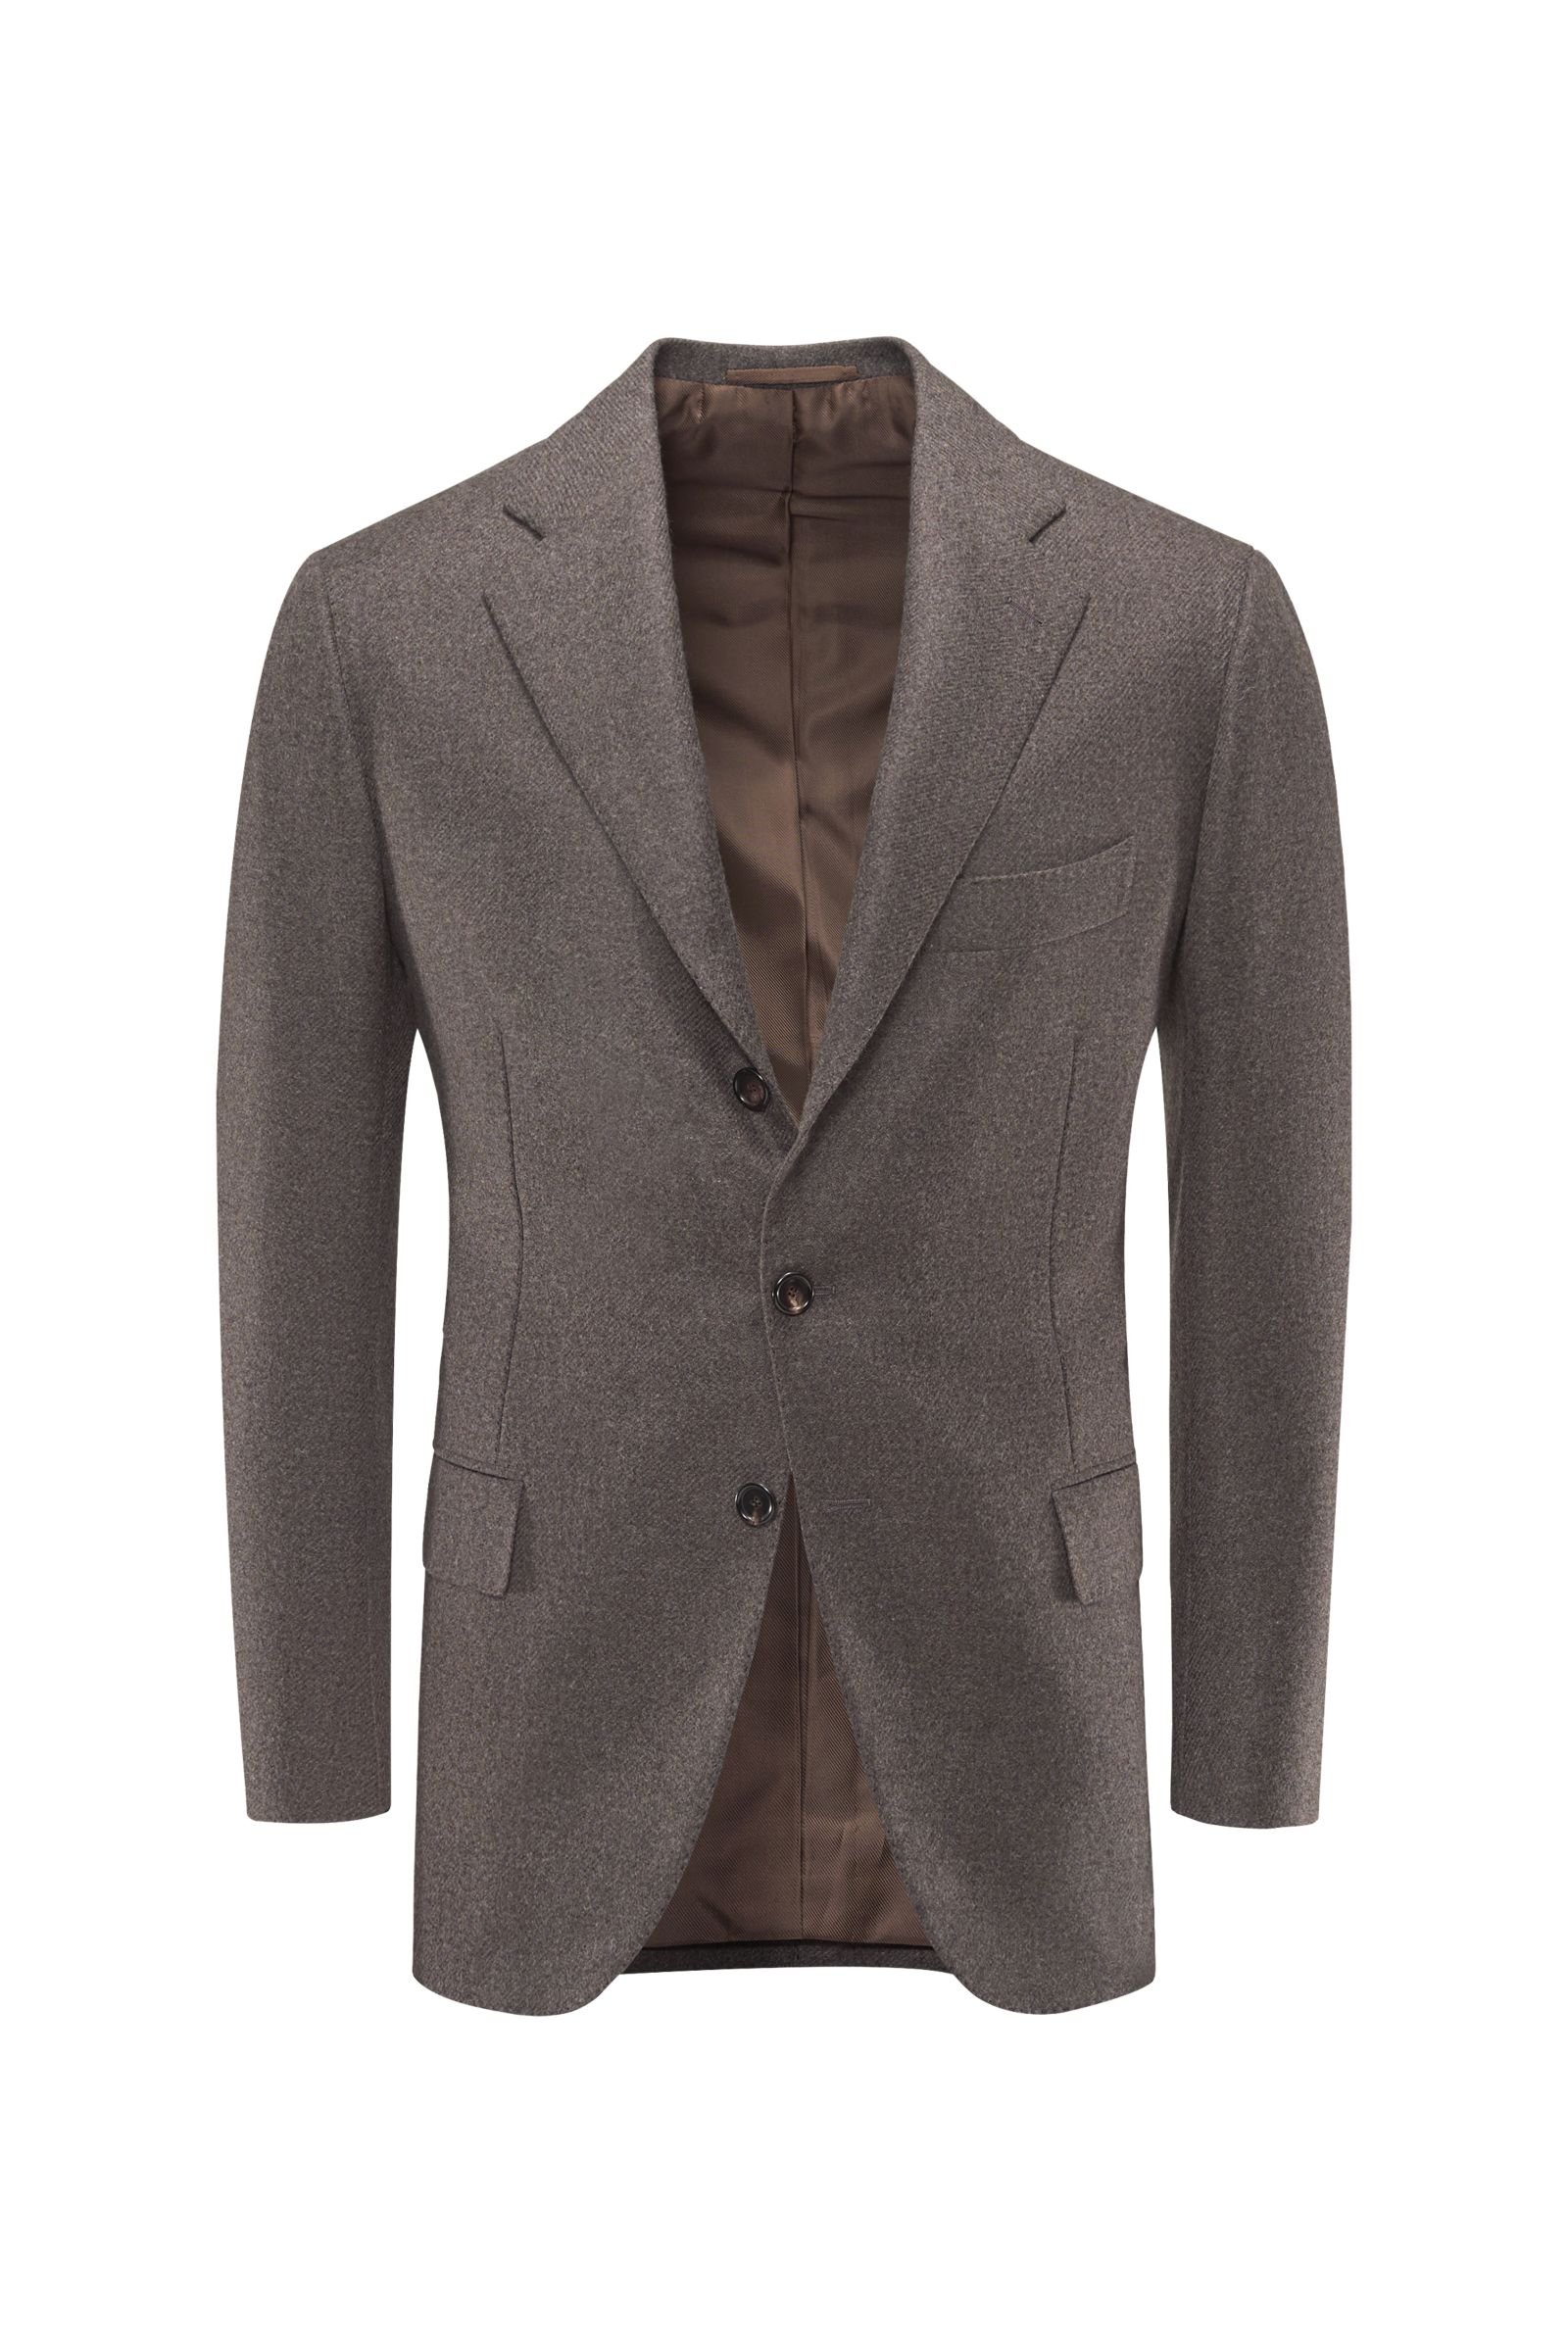 Cashmere smart-casual jacket brown